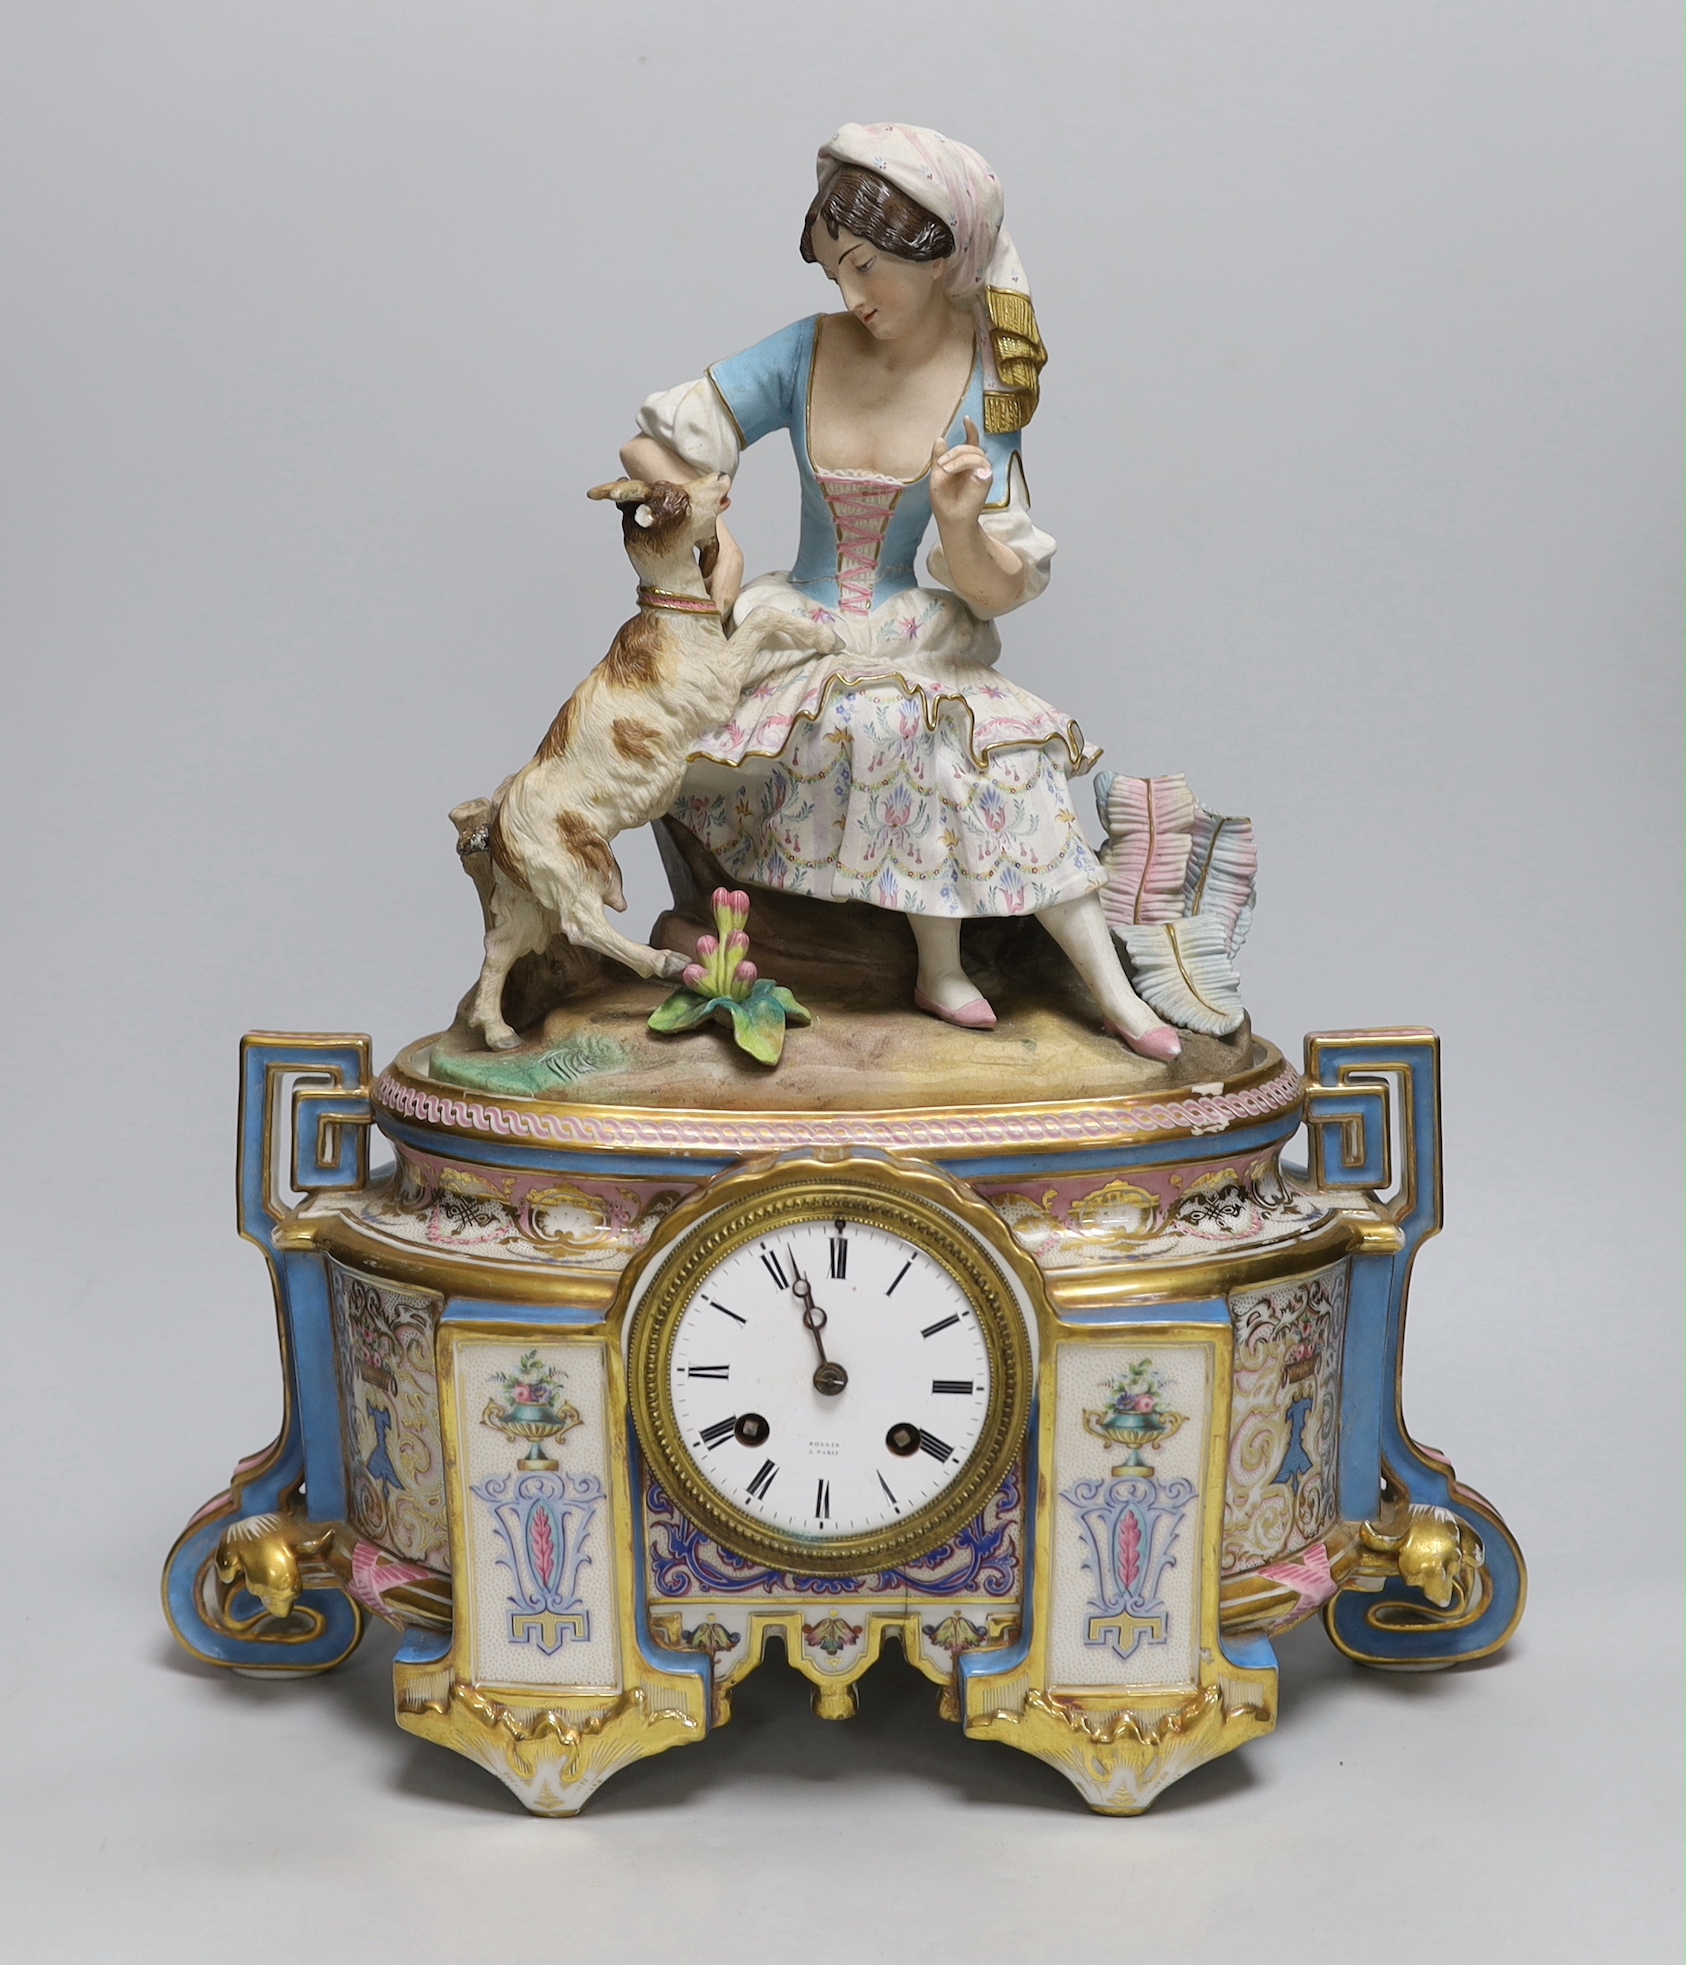 A mid-19th French century porcelain figural mantel clock, the enamel dial inscribed Rollin Paris,